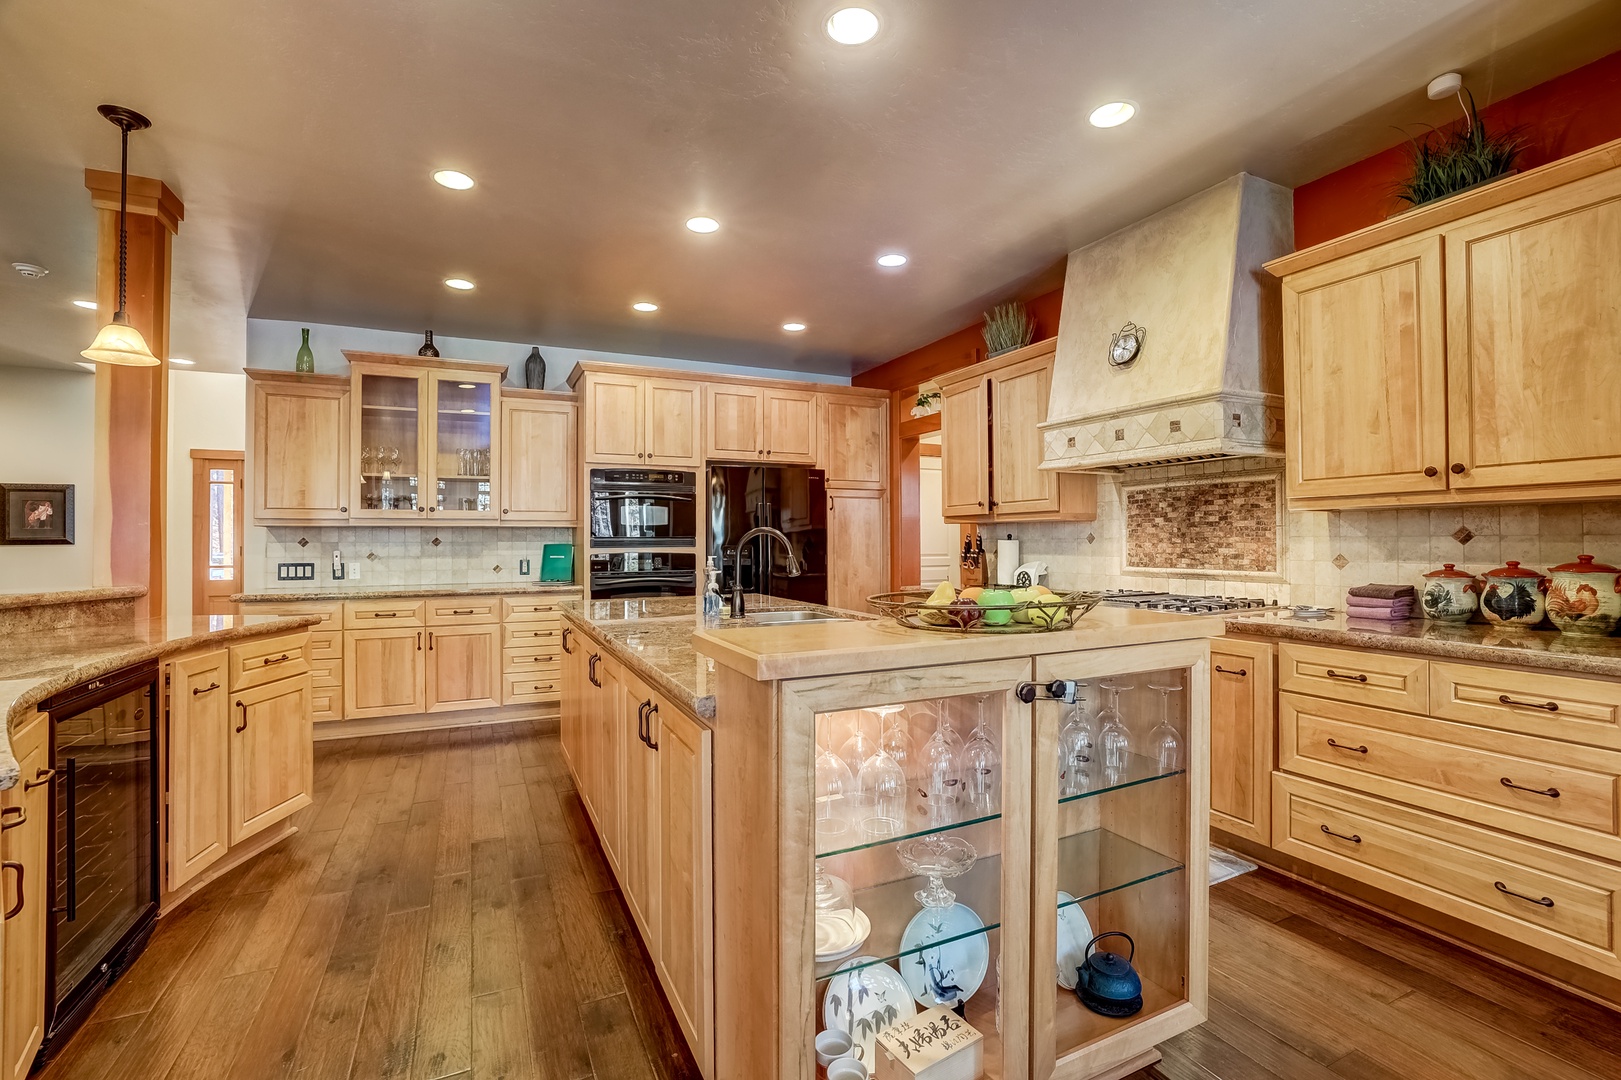 Full kitchen with Keurig, standard coffee maker, blender, and more!